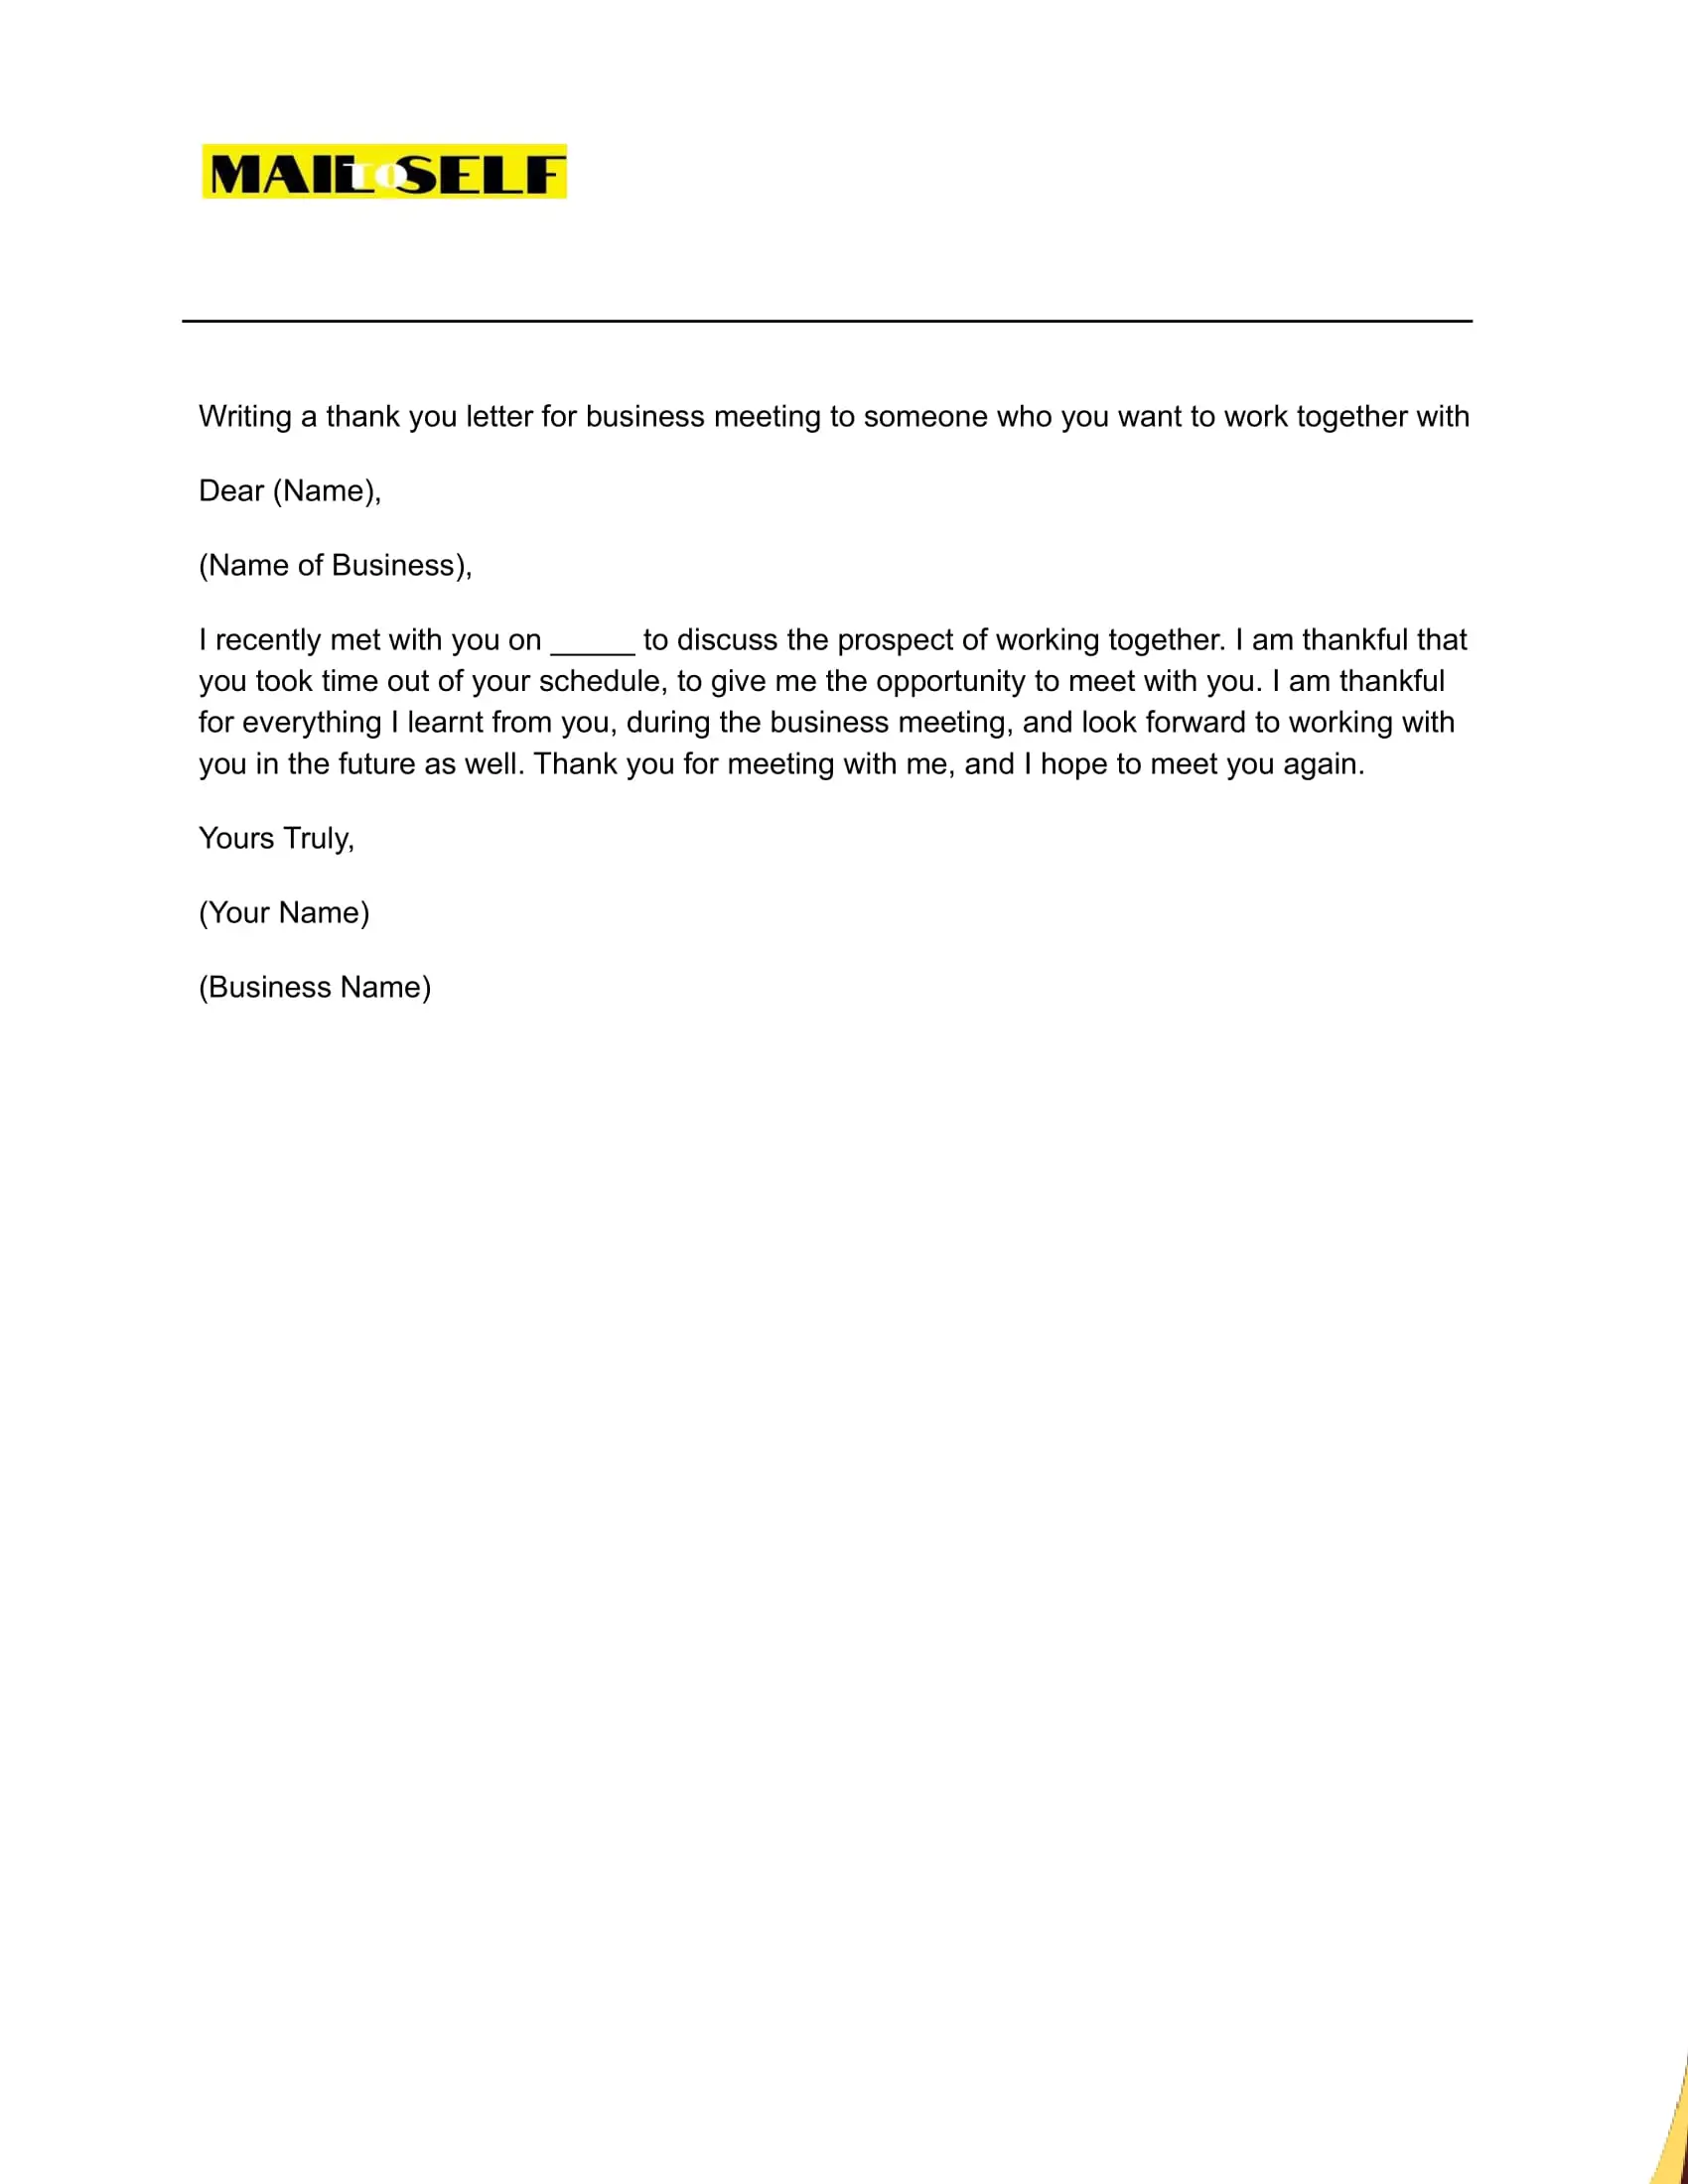 Sample #2 Thank You Letter for Business Meeting